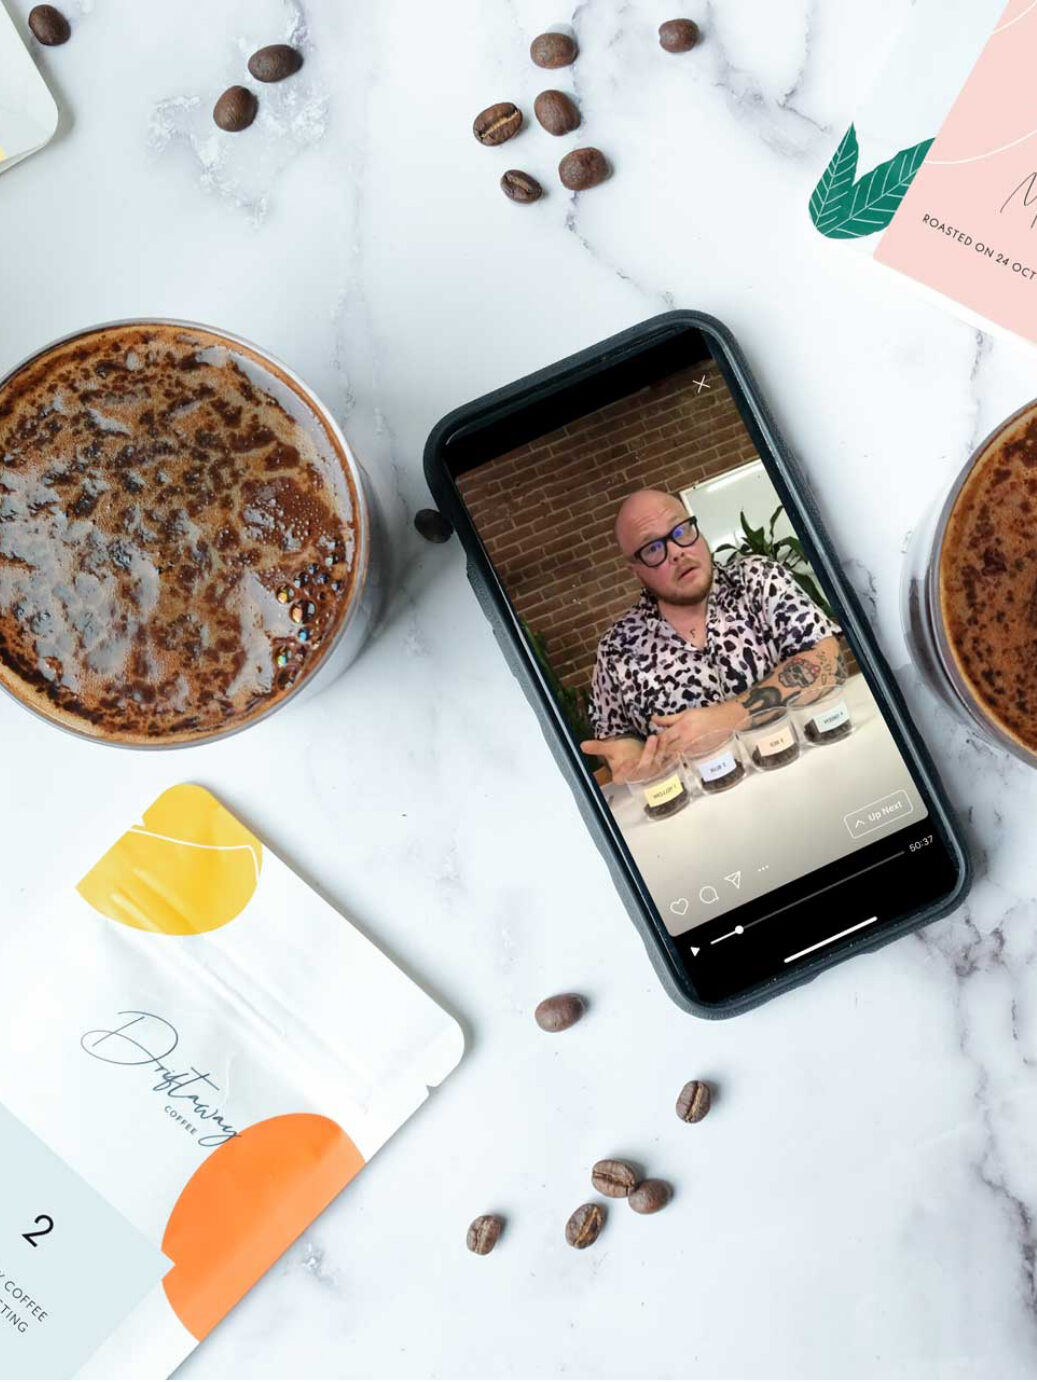 A marble top table with loose coffee beans, a brewing cup of coffee, a Driftaway coffee bag, and a virtual tasting on a phone screen.